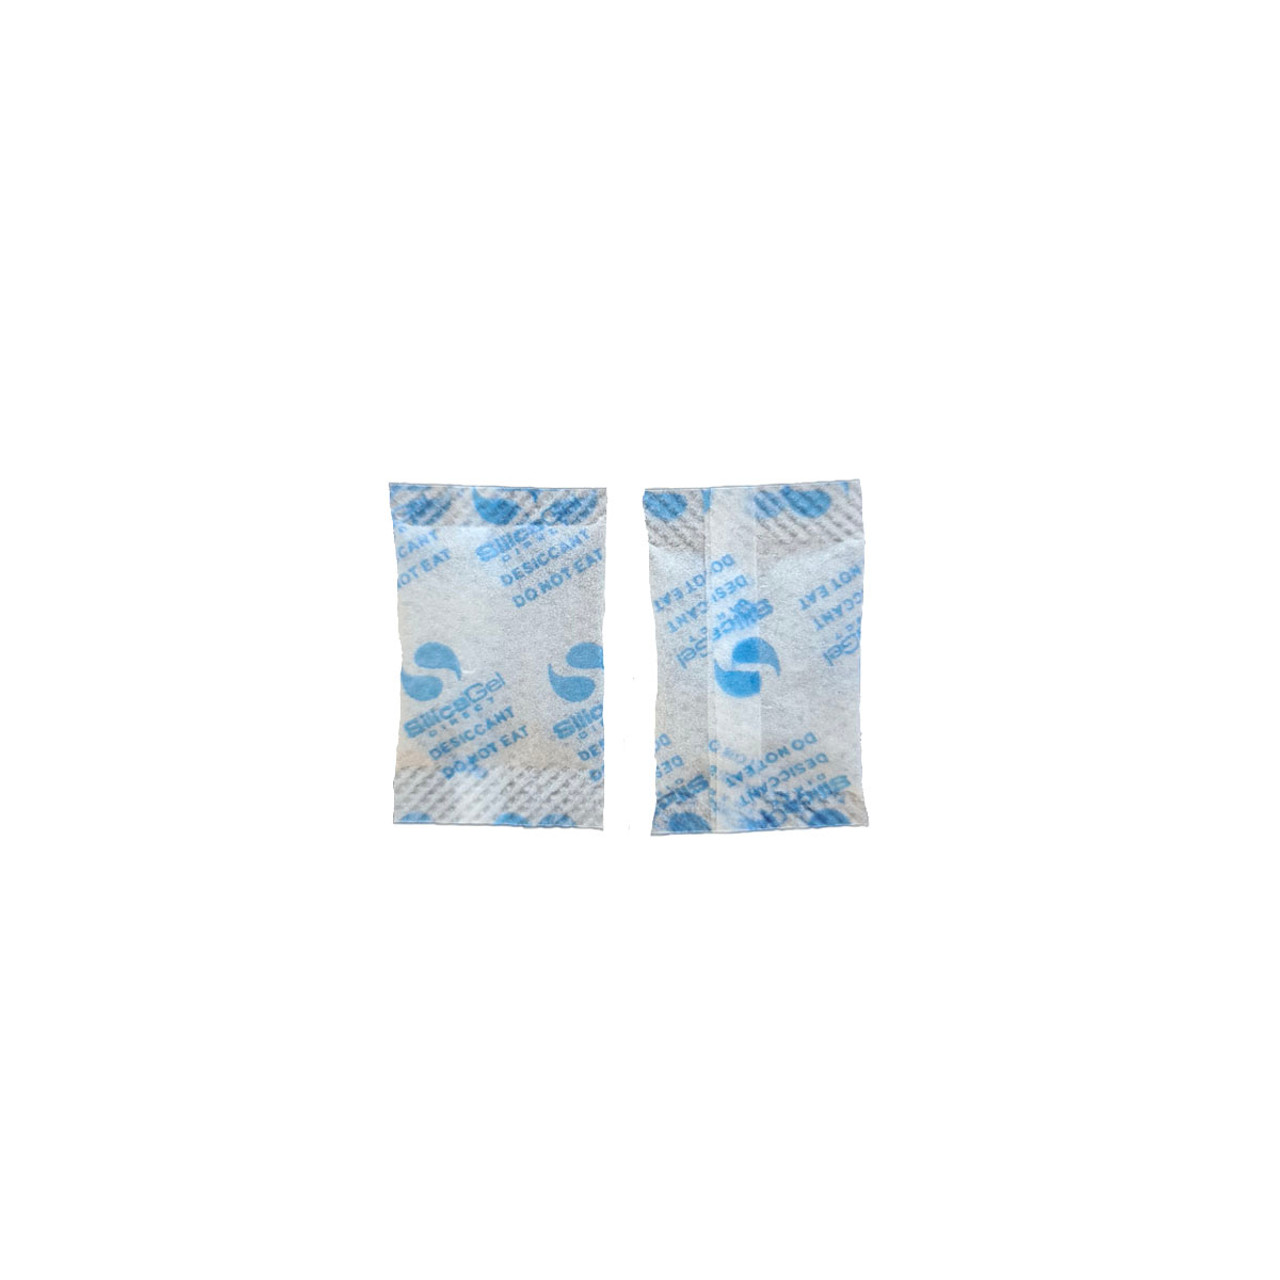 0.5gm Silica Gel Moisture Absorber Aiwa Paper Desiccant Packets 